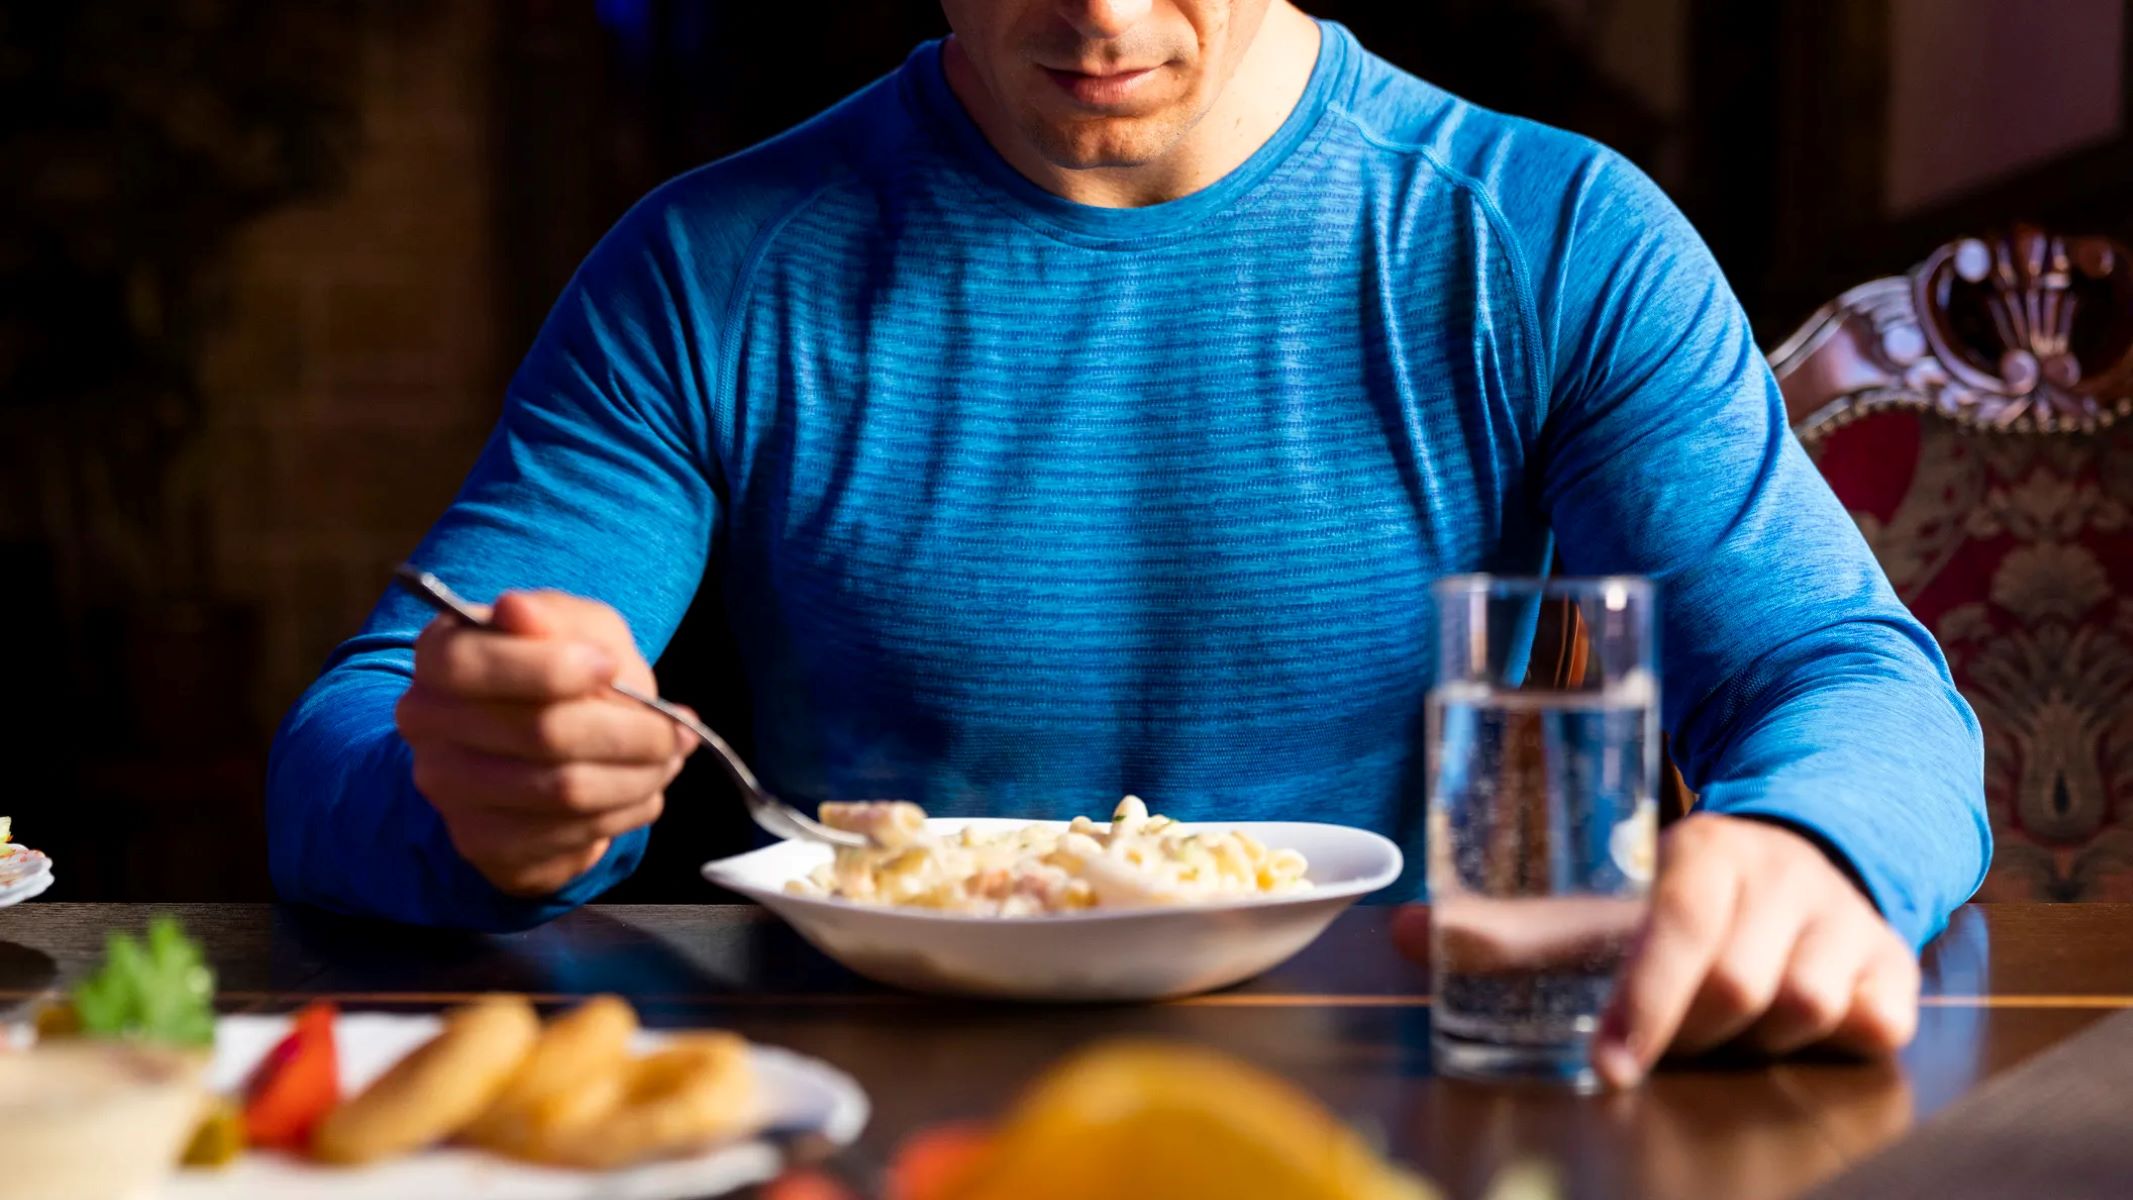 What Kind Of Diet Do Endurance Athletes Generally Need